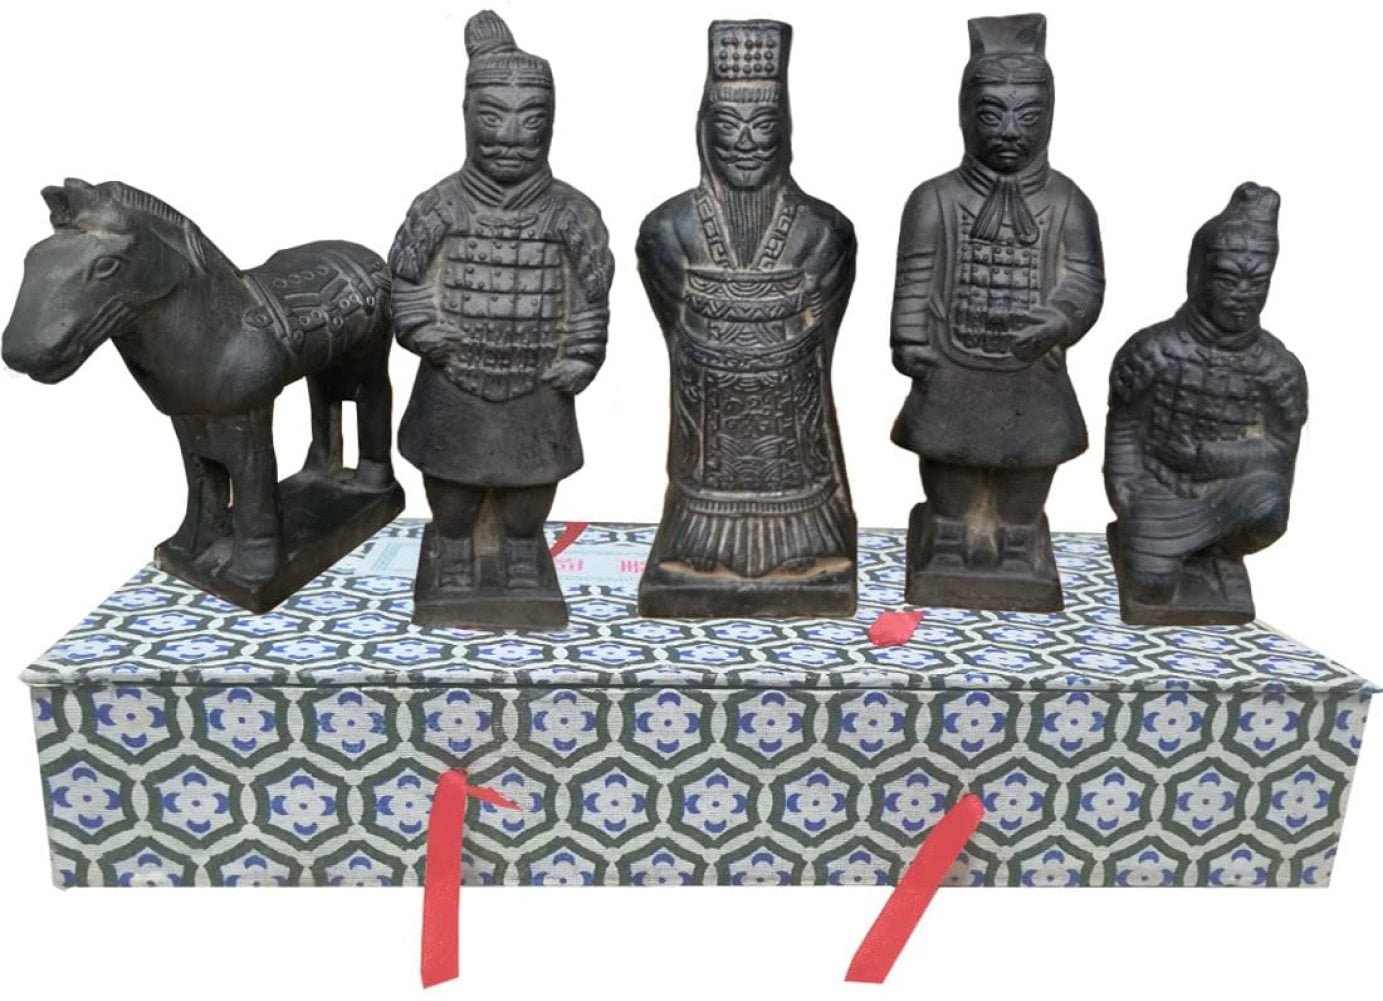 Terracotta Warriors set of 5 China Qin Dynasty Terra Cotta Warriors Sculpture Home Display Table Display Gift 12 cm tall 